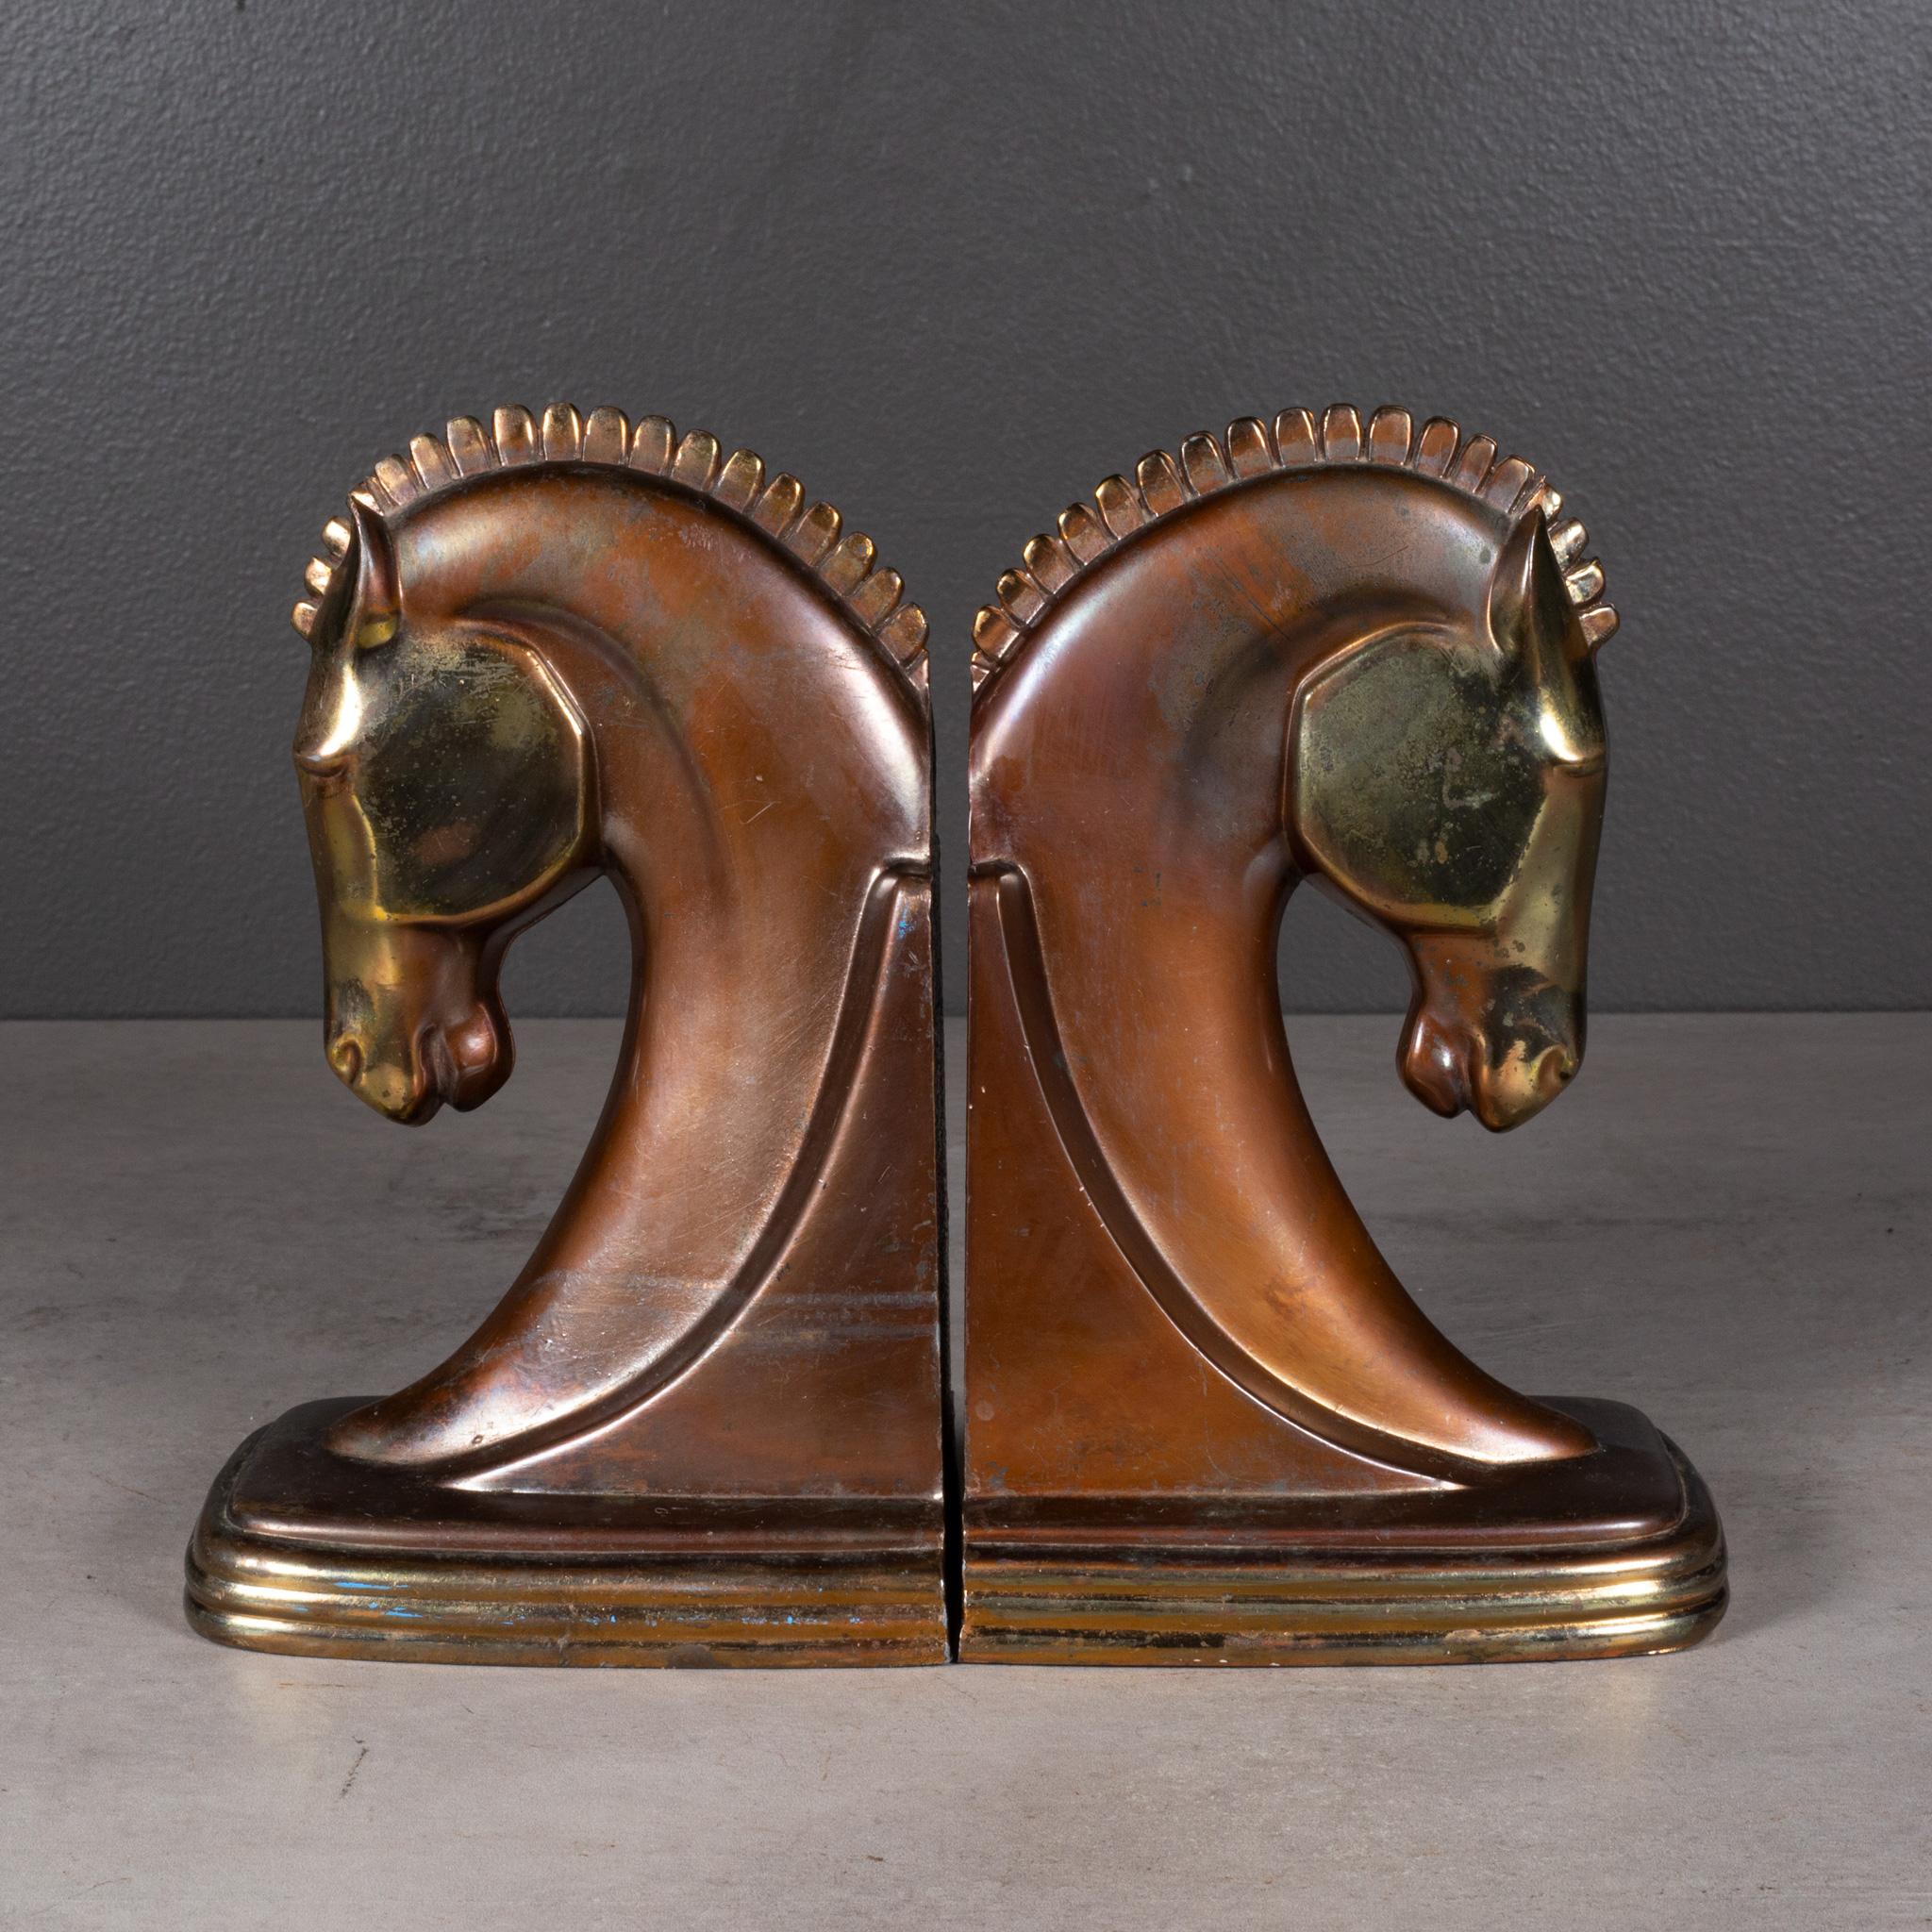 20th Century Art Deco Bronze and Copper Plated Trojan Horse Bookends by Dodge Inc. c.1930